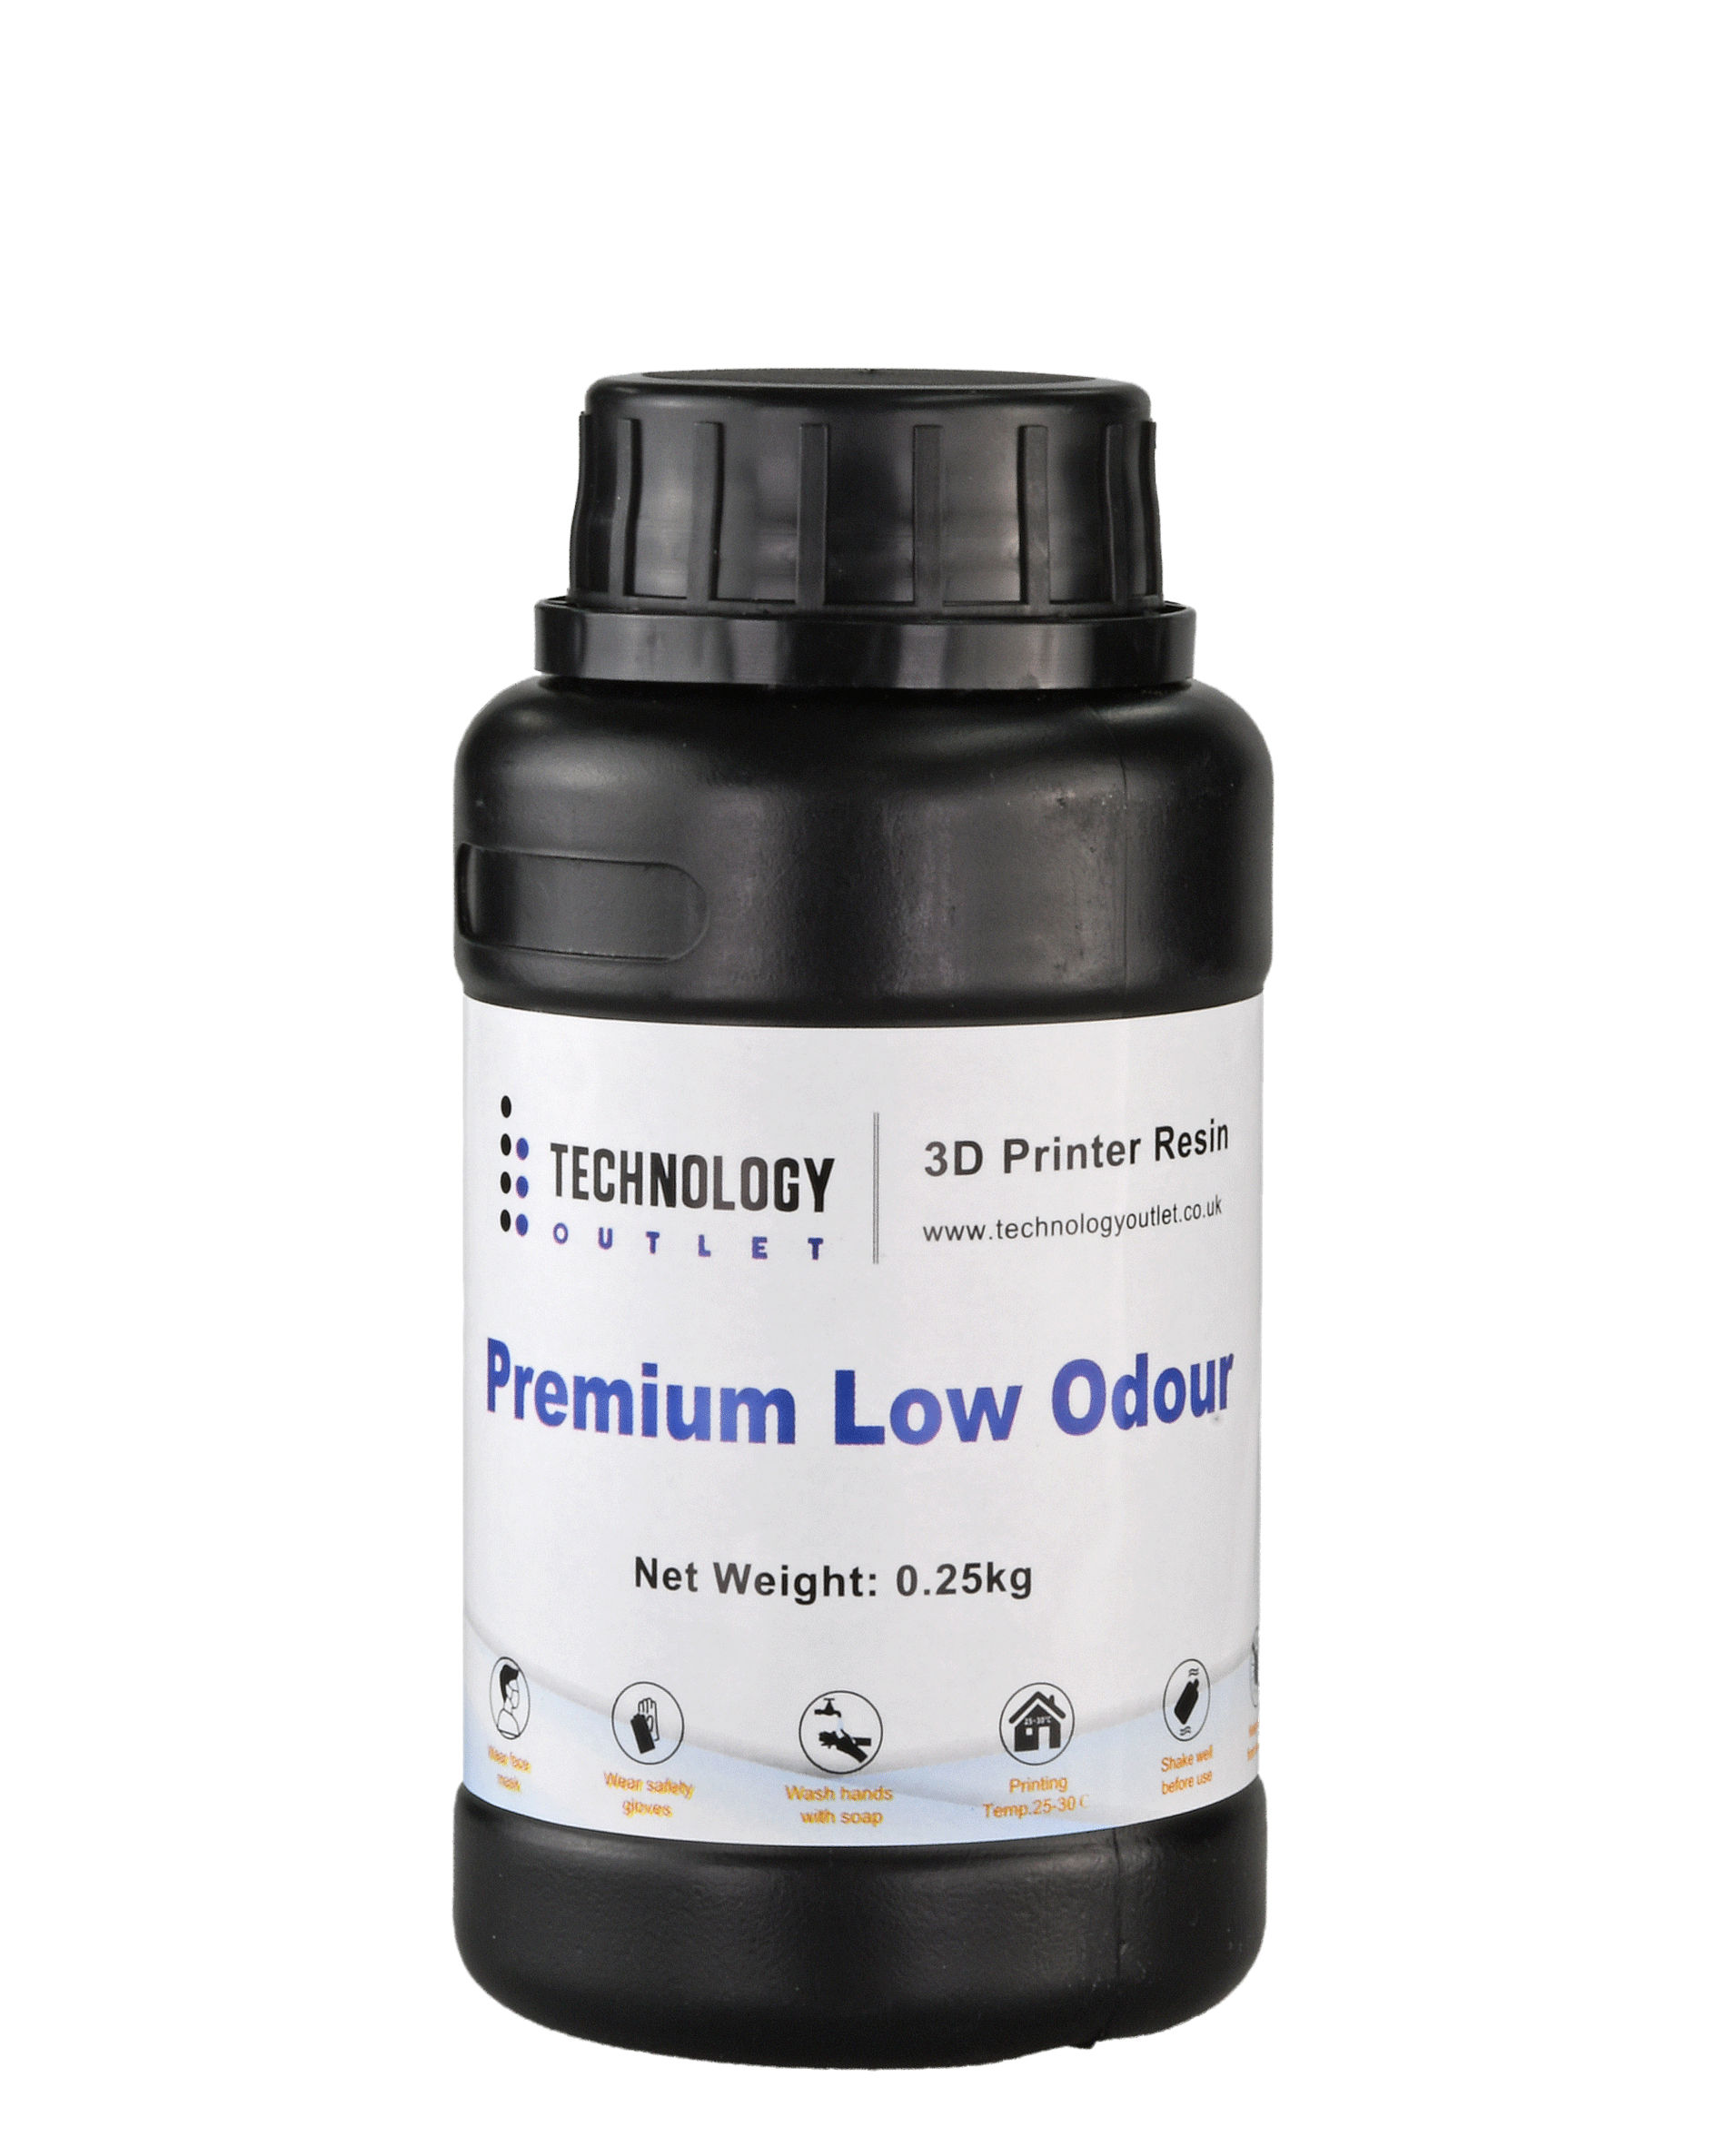 Technology Outlet Premium Low Odour 3D Printer Resin - Technology Outlet